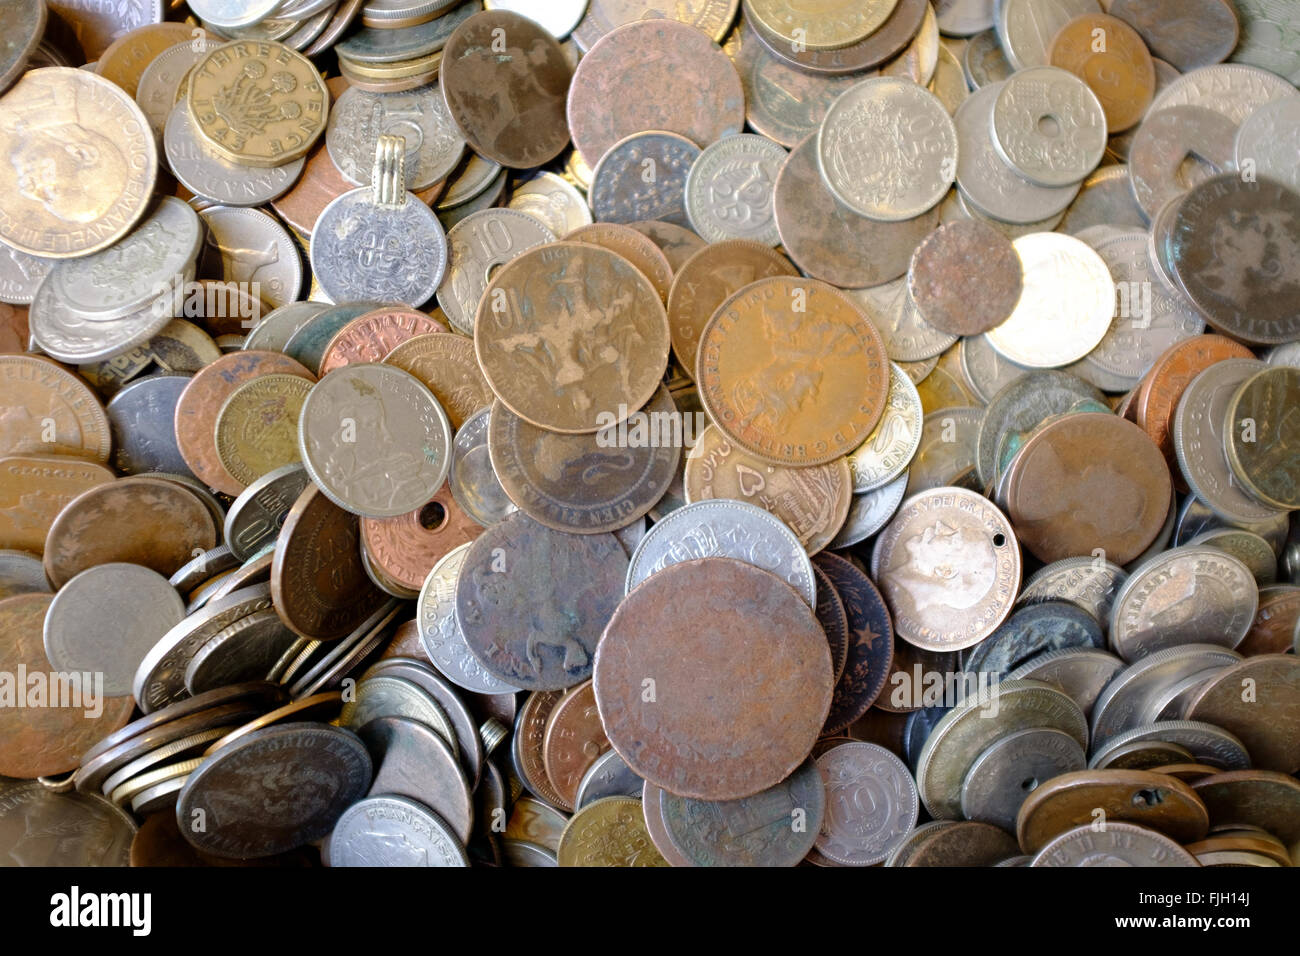 A mix of old coins Stock Photo